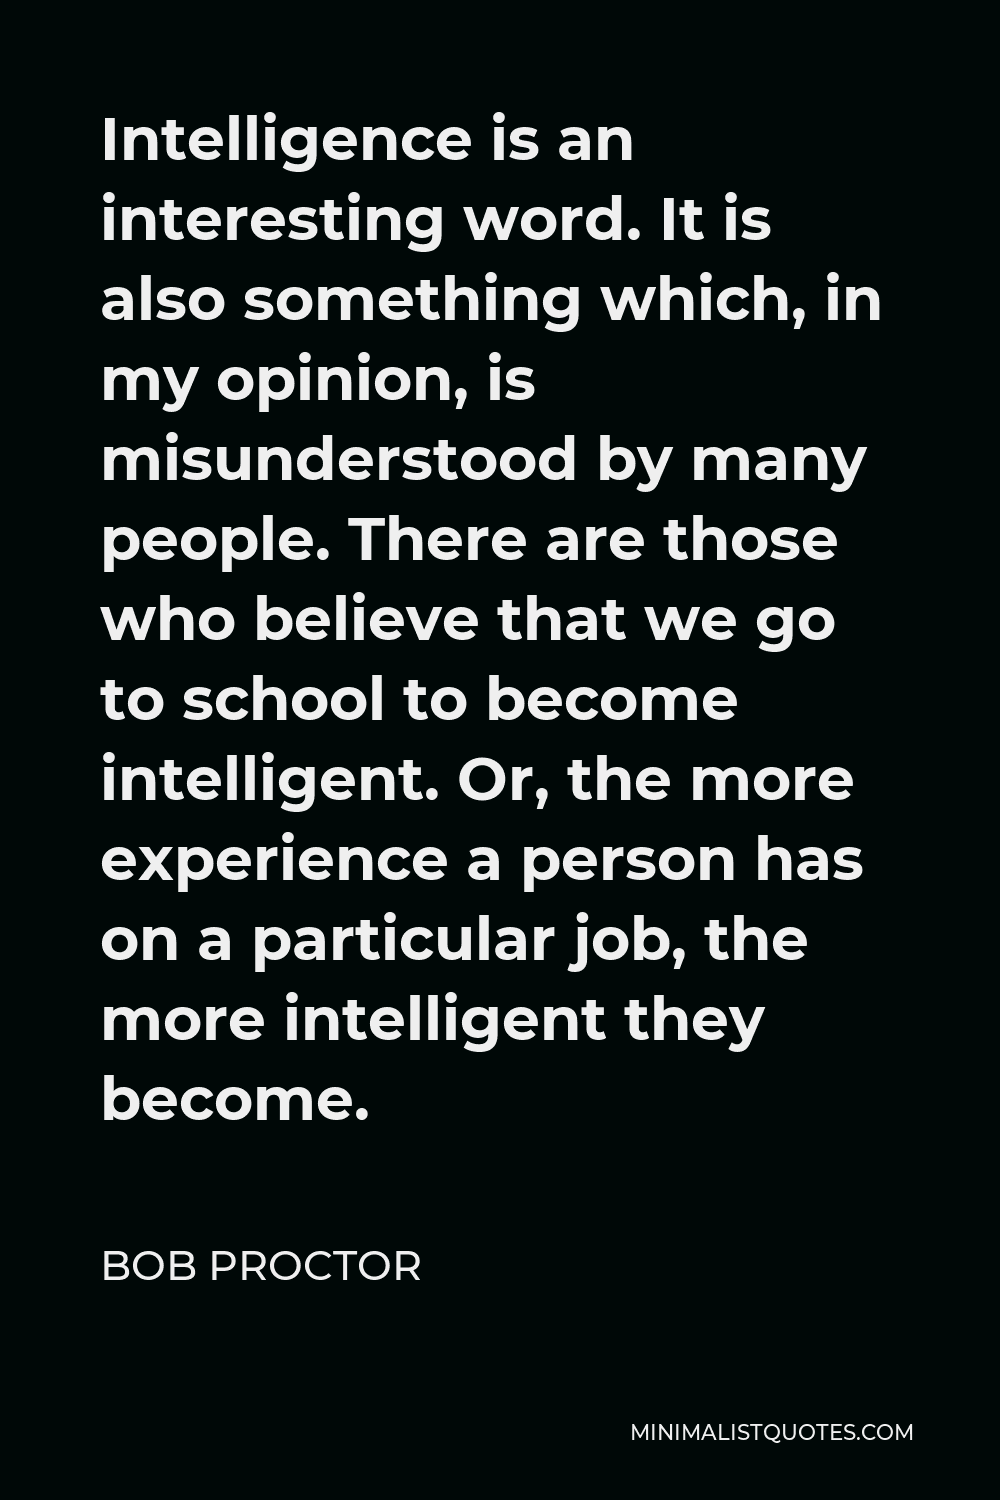 Bob Proctor Quote - Intelligence is an interesting word. It is also something which, in my opinion, is misunderstood by many people. There are those who believe that we go to school to become intelligent. Or, the more experience a person has on a particular job, the more intelligent they become.